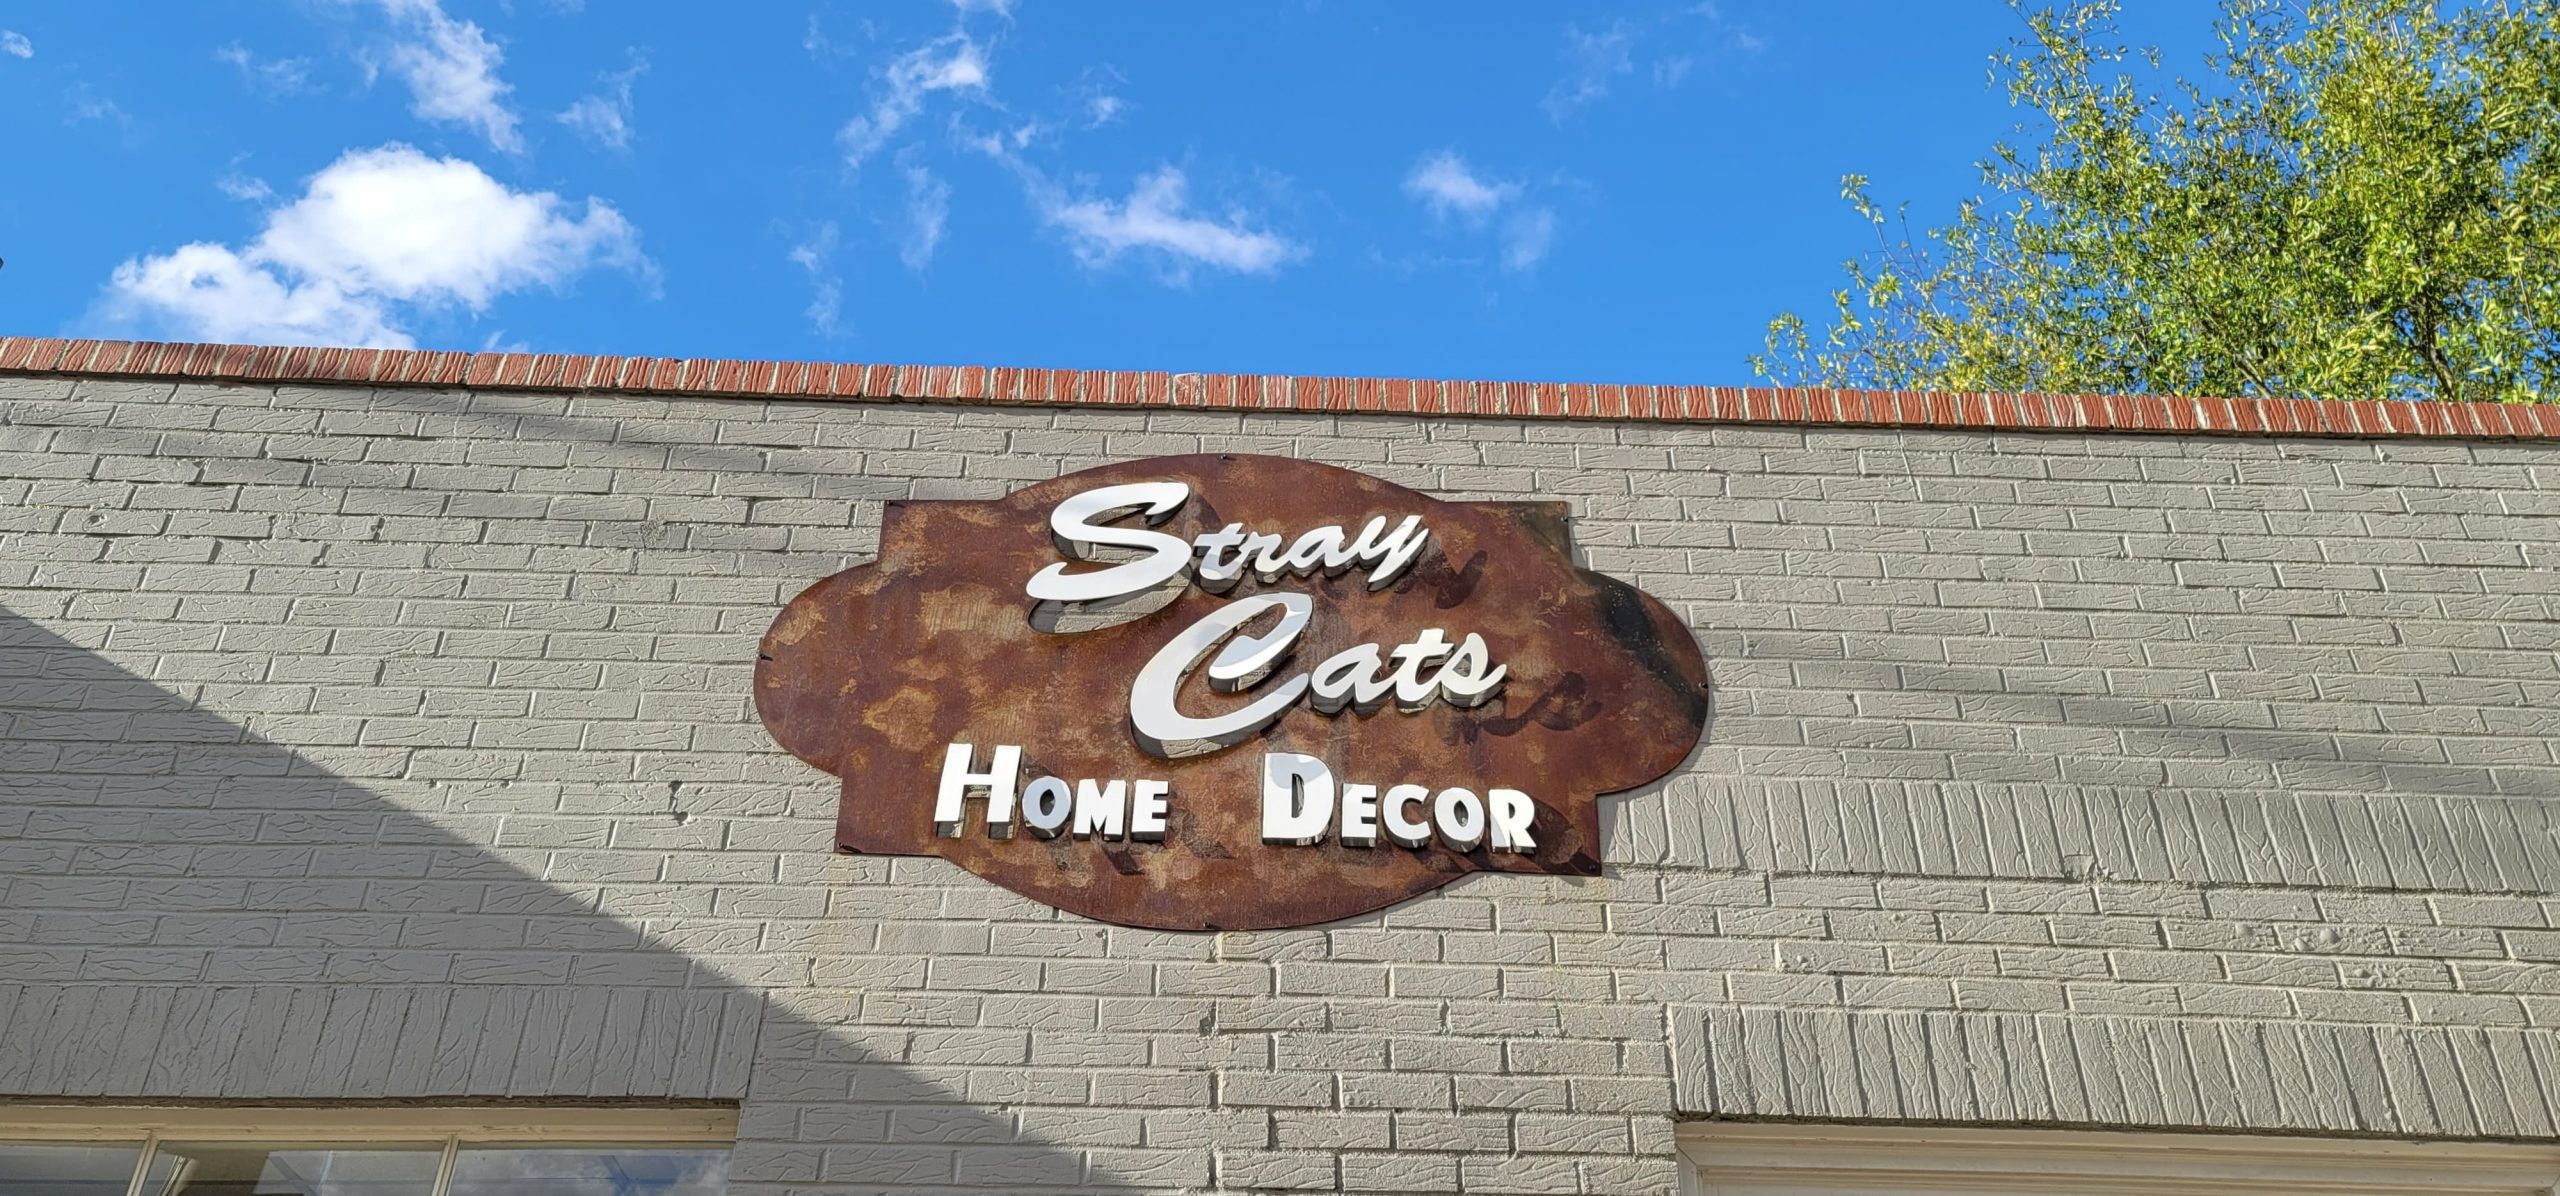 Stray Cats Home Decor sets opening date in Trussville